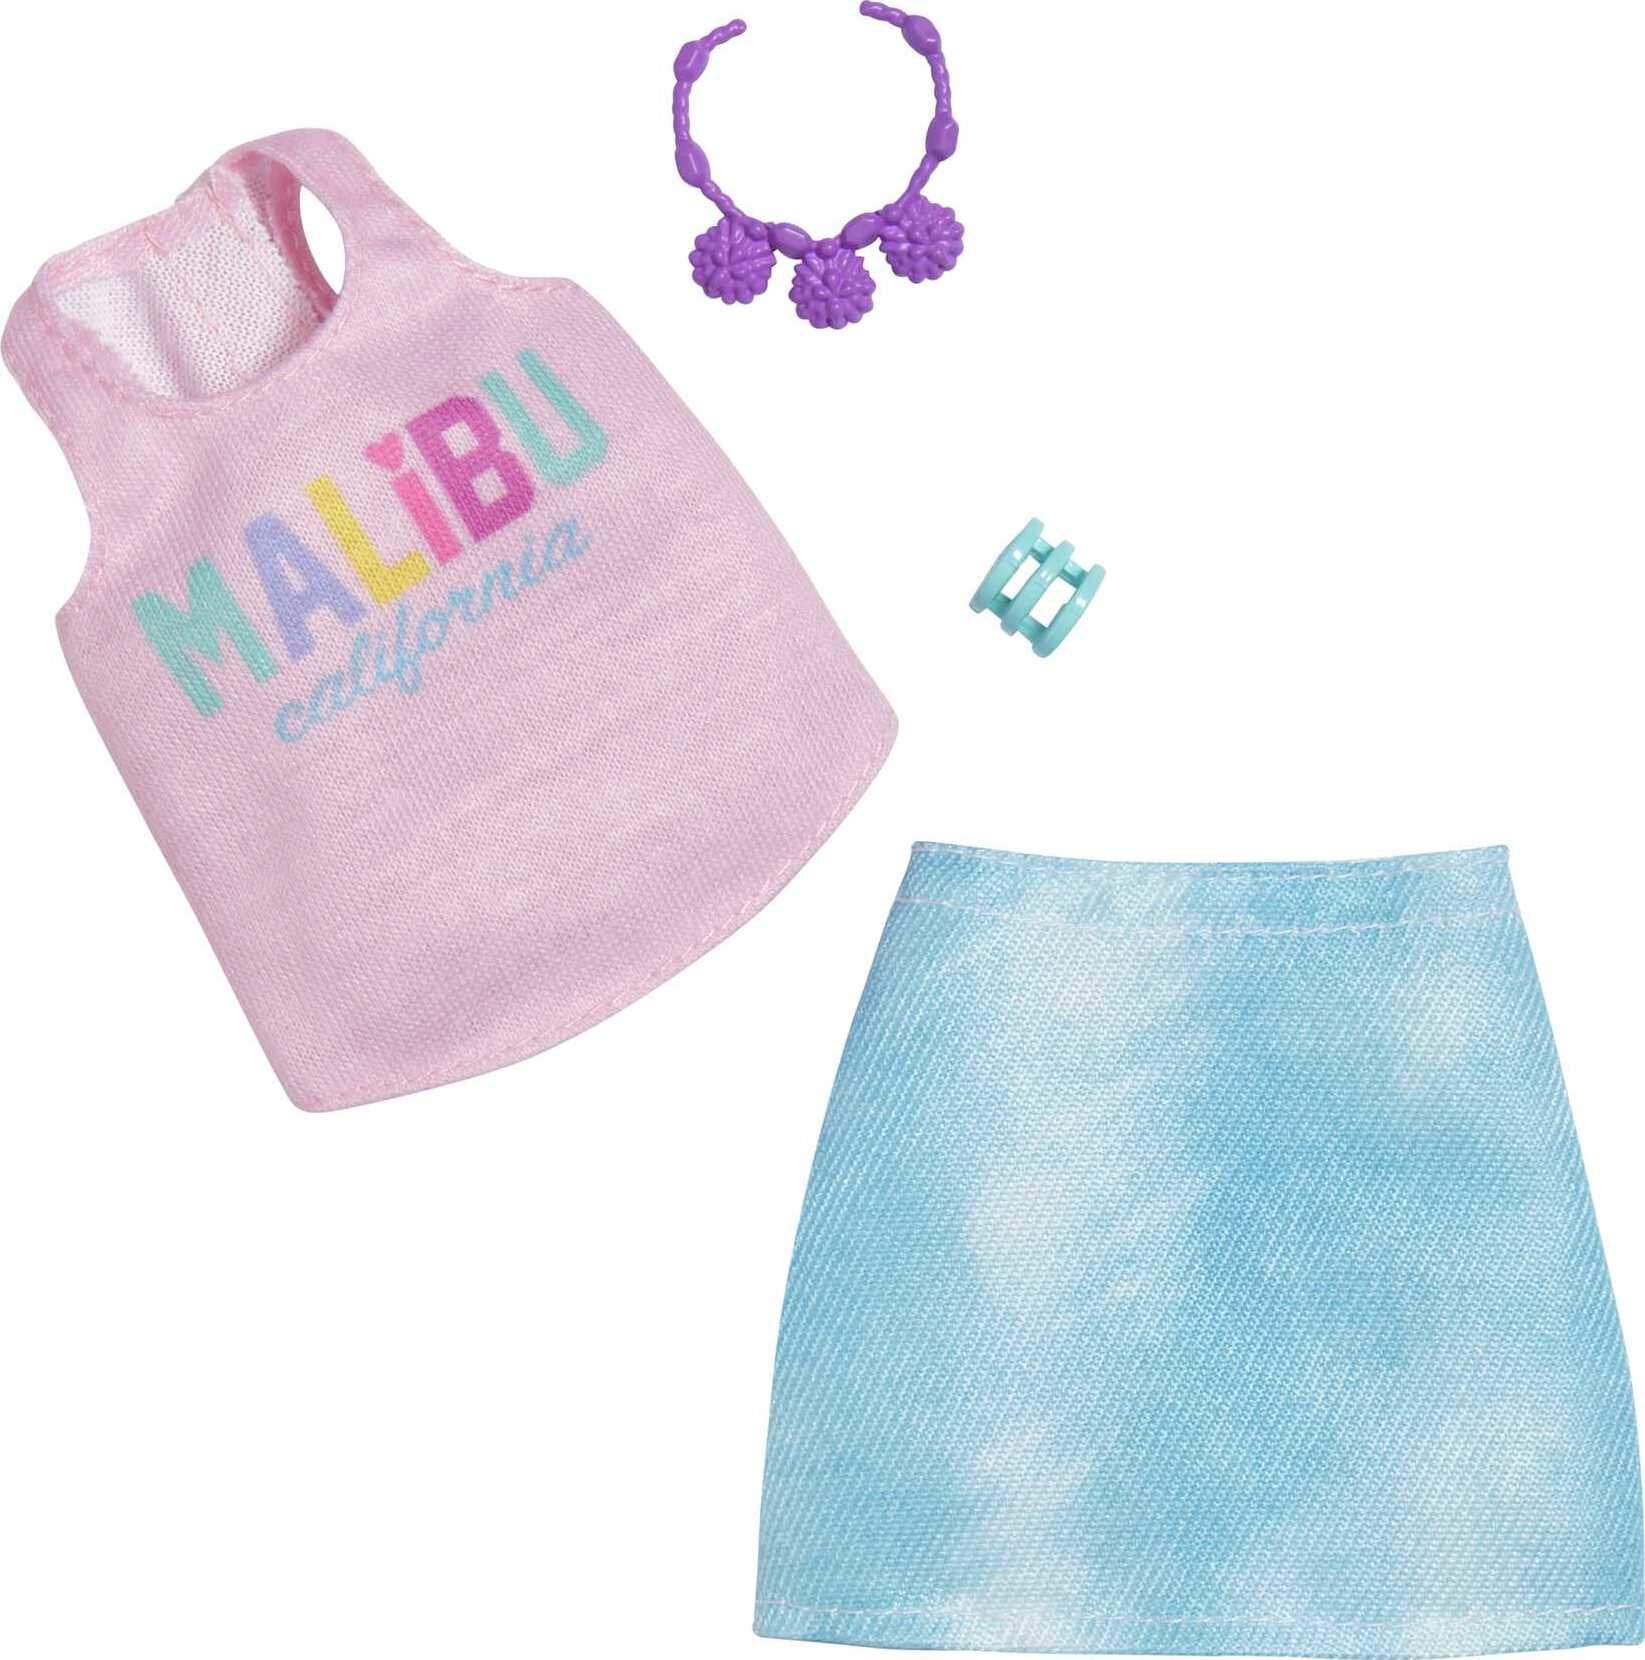 Barbie Fashion Pack of Doll Clothes, Complete Look Set with Malibu Tank, Skirt and Accessories